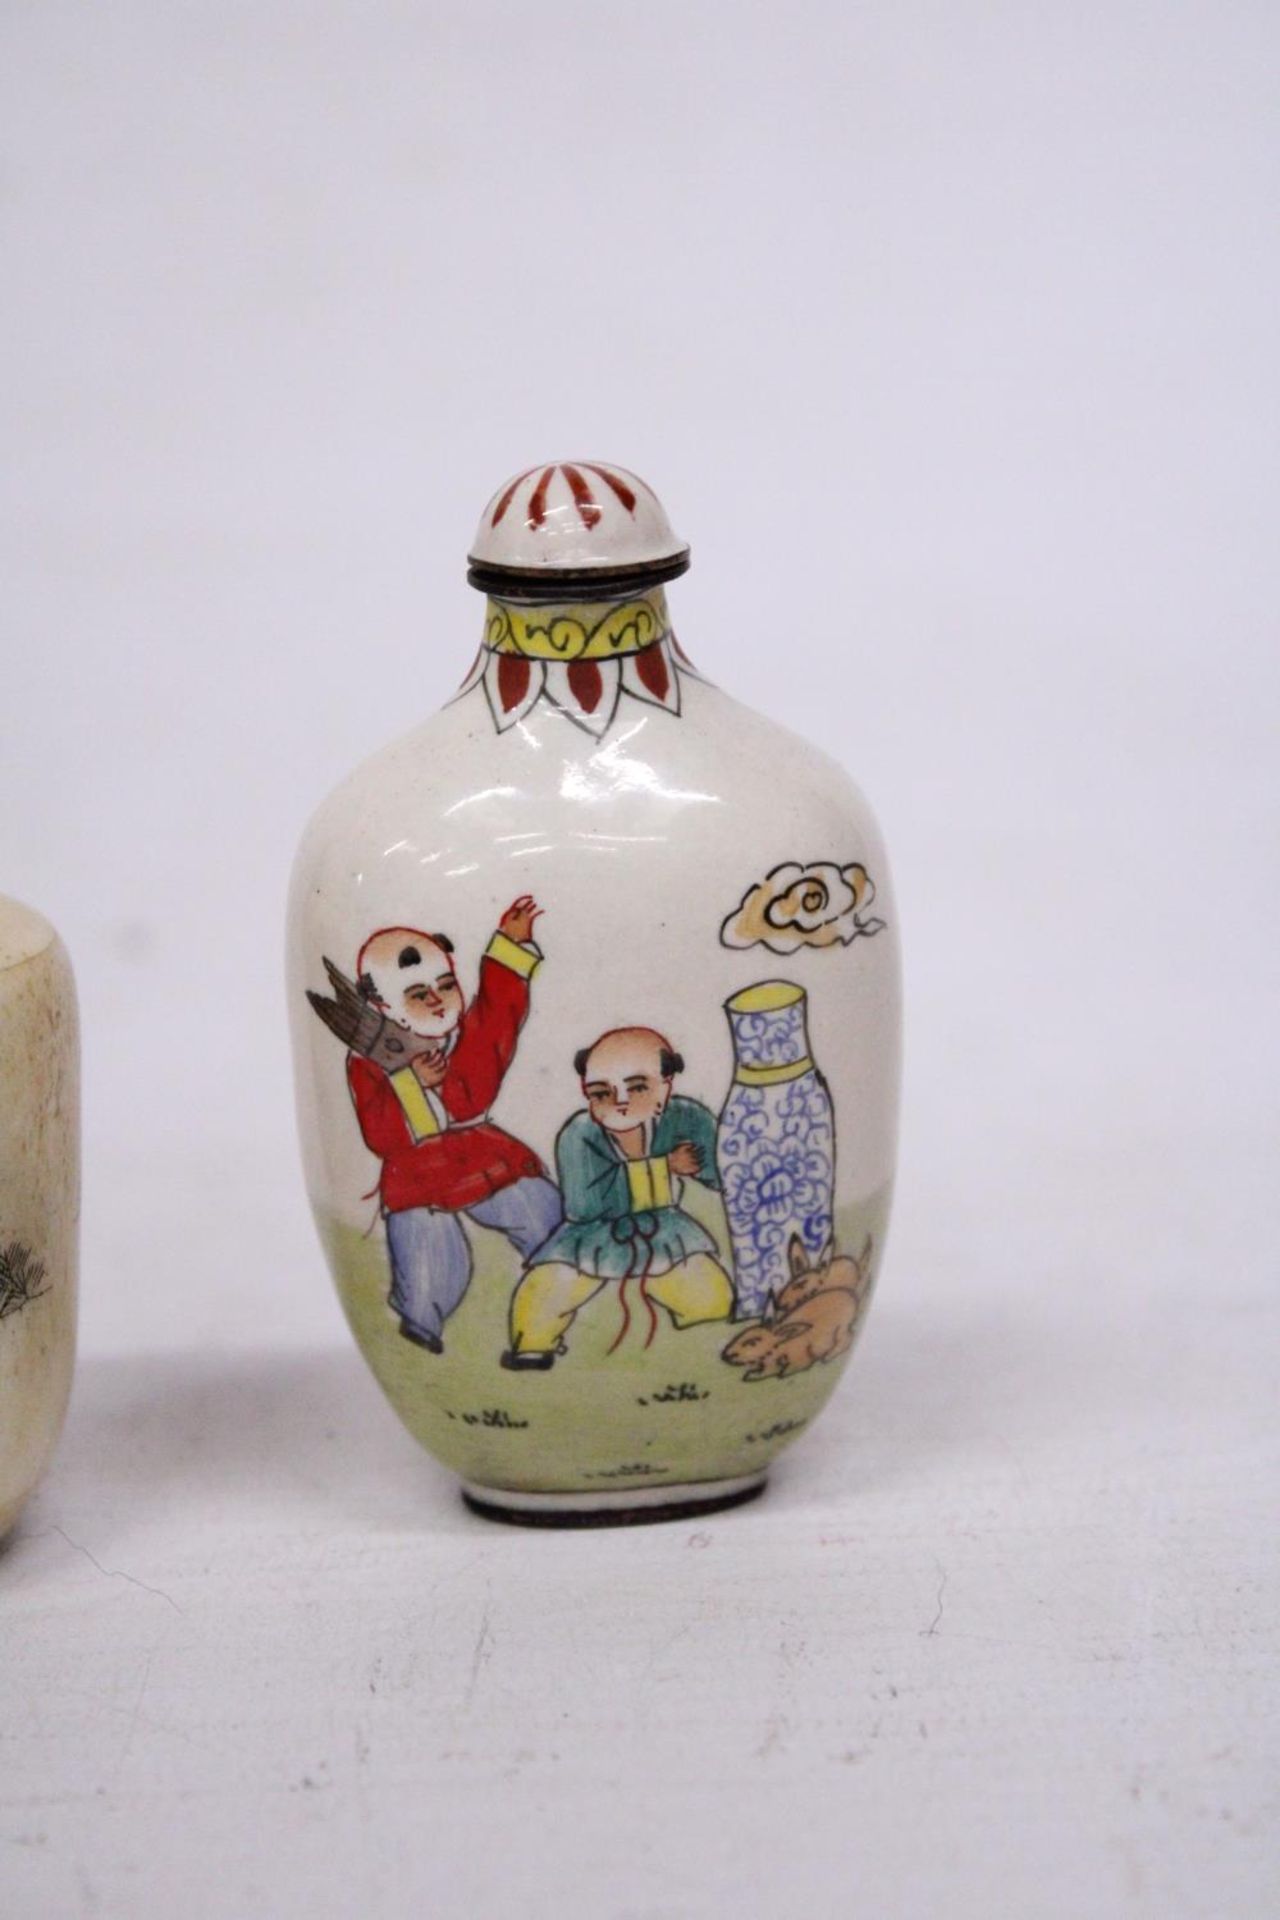 AN ANTIQUE CHINESE CLOISONNE ENAMELLED SNUFF/SCENT BOTTLE SIGNED TO THE BASE PLUS A VINTAGE - Image 5 of 7